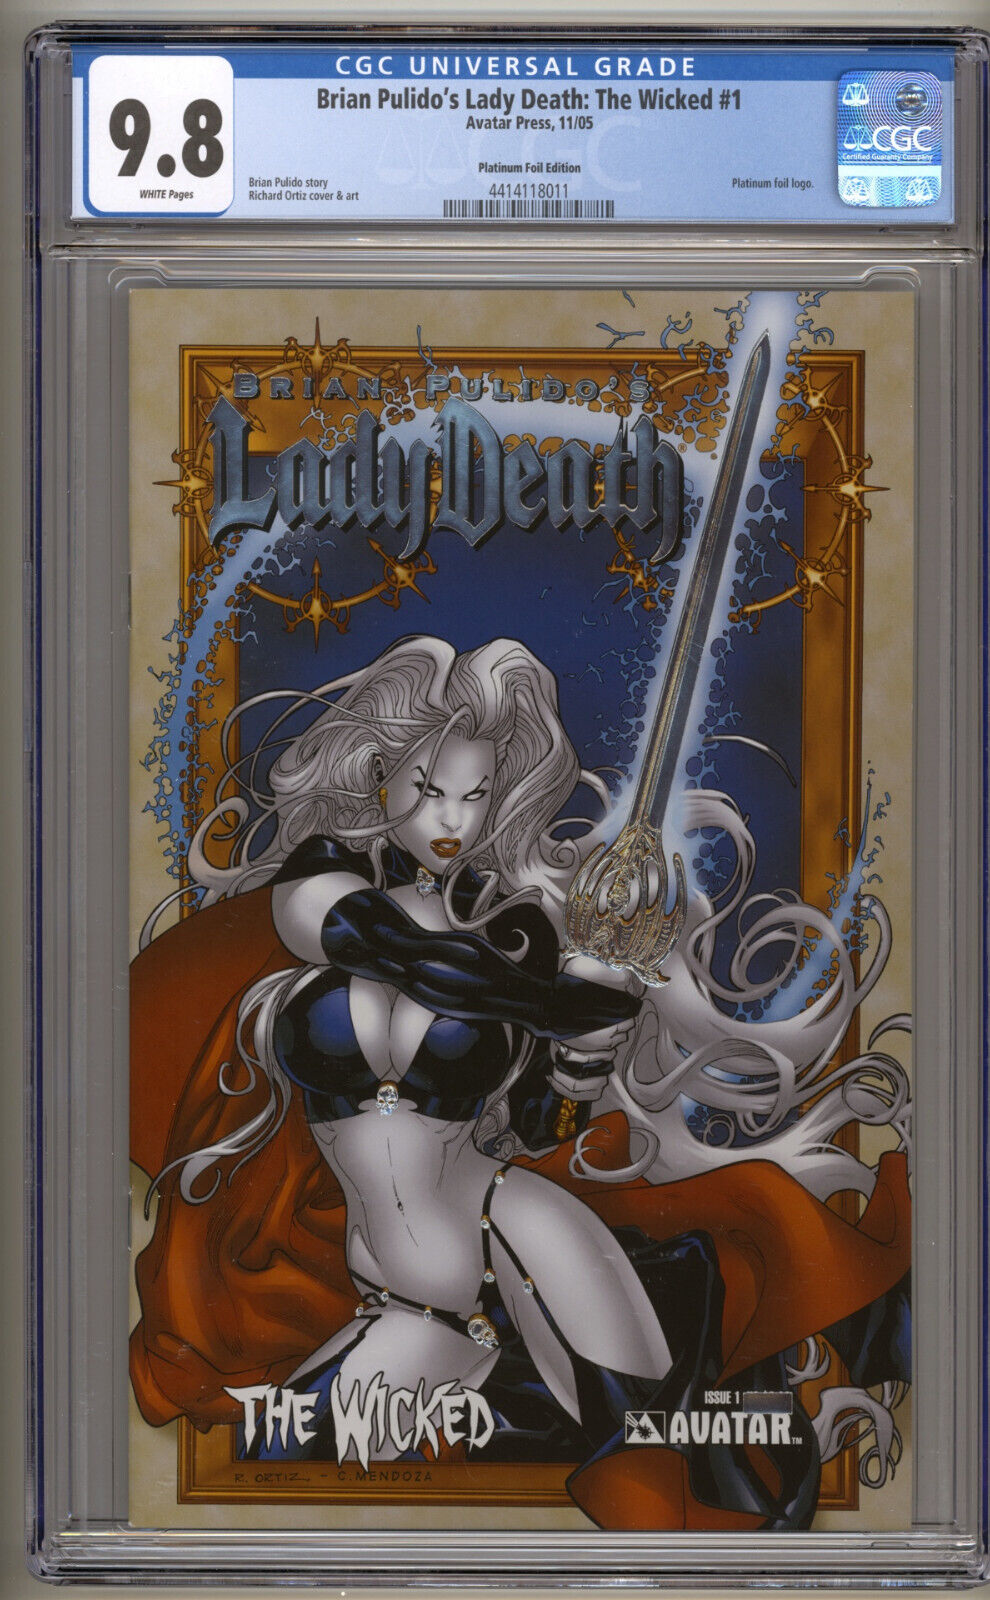 Lady Death The Wicked #1 CGC 9.8 Platinum Foil Edition Highest Graded (2005)